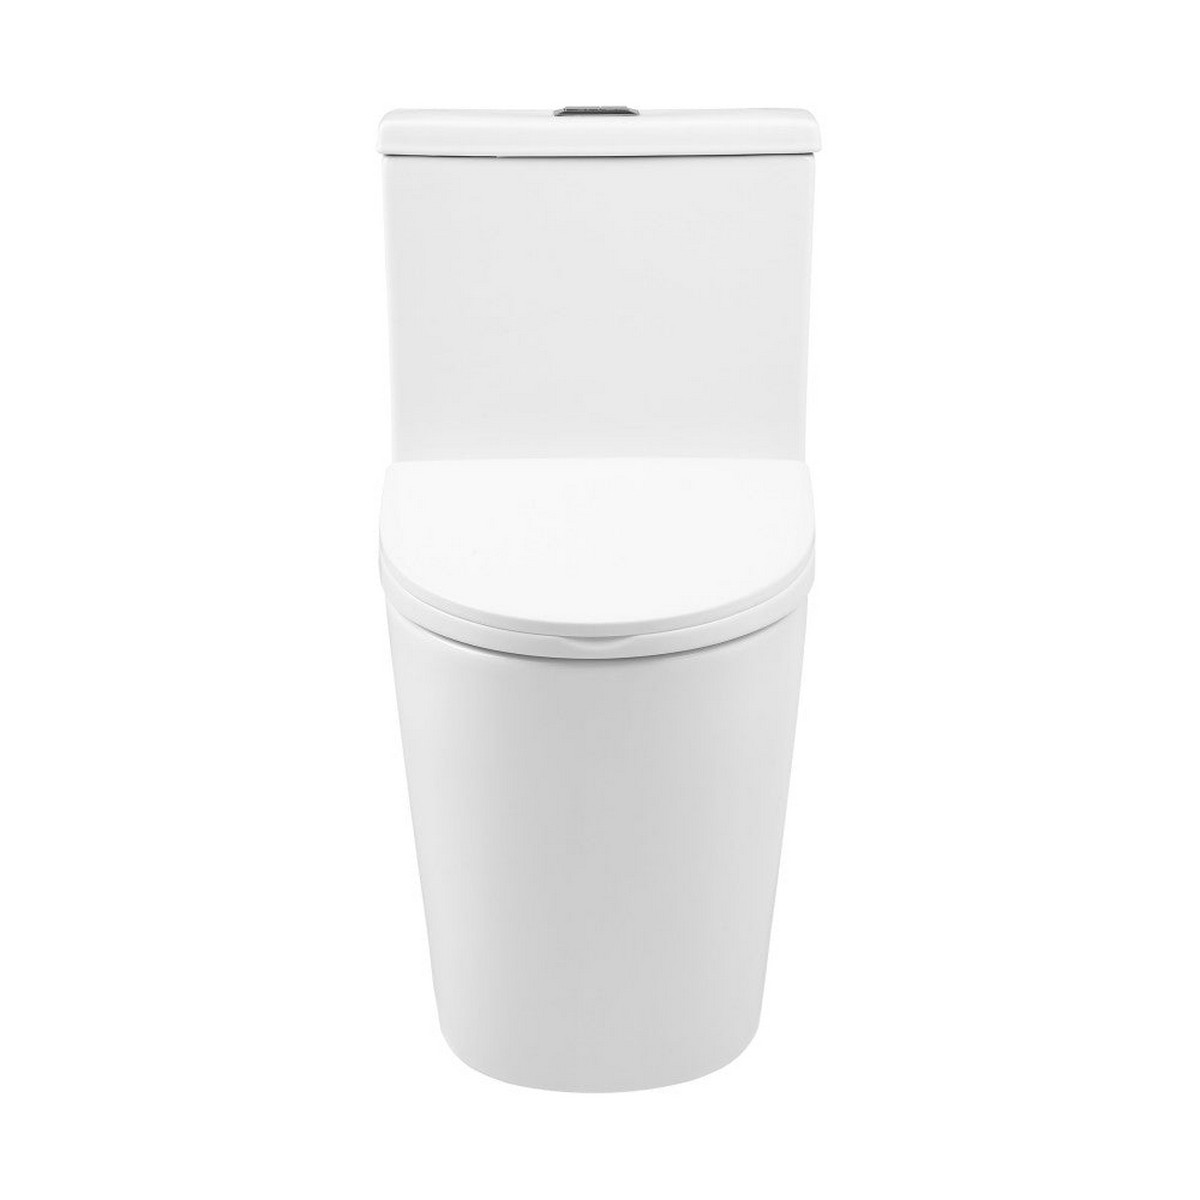 SWISS MADISON SM-1T18 DREUX 0.95/1.26 GPF DUAL FLUSH ONE PIECE ELONGATED TOILET IN MATTE GREY